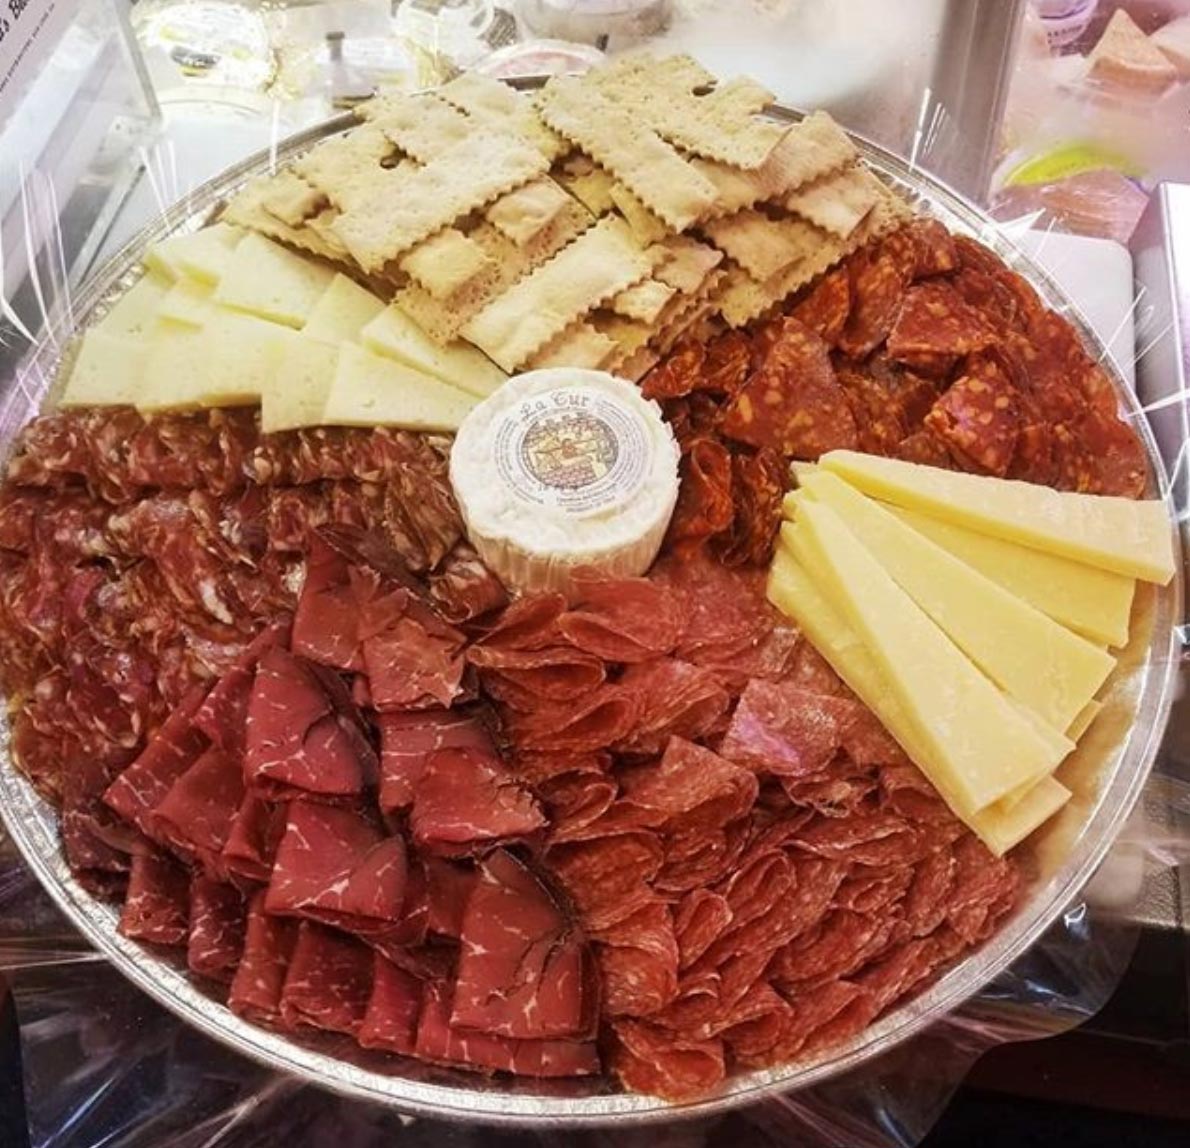 Cheese and a lot of plus! Photo via Instagram.